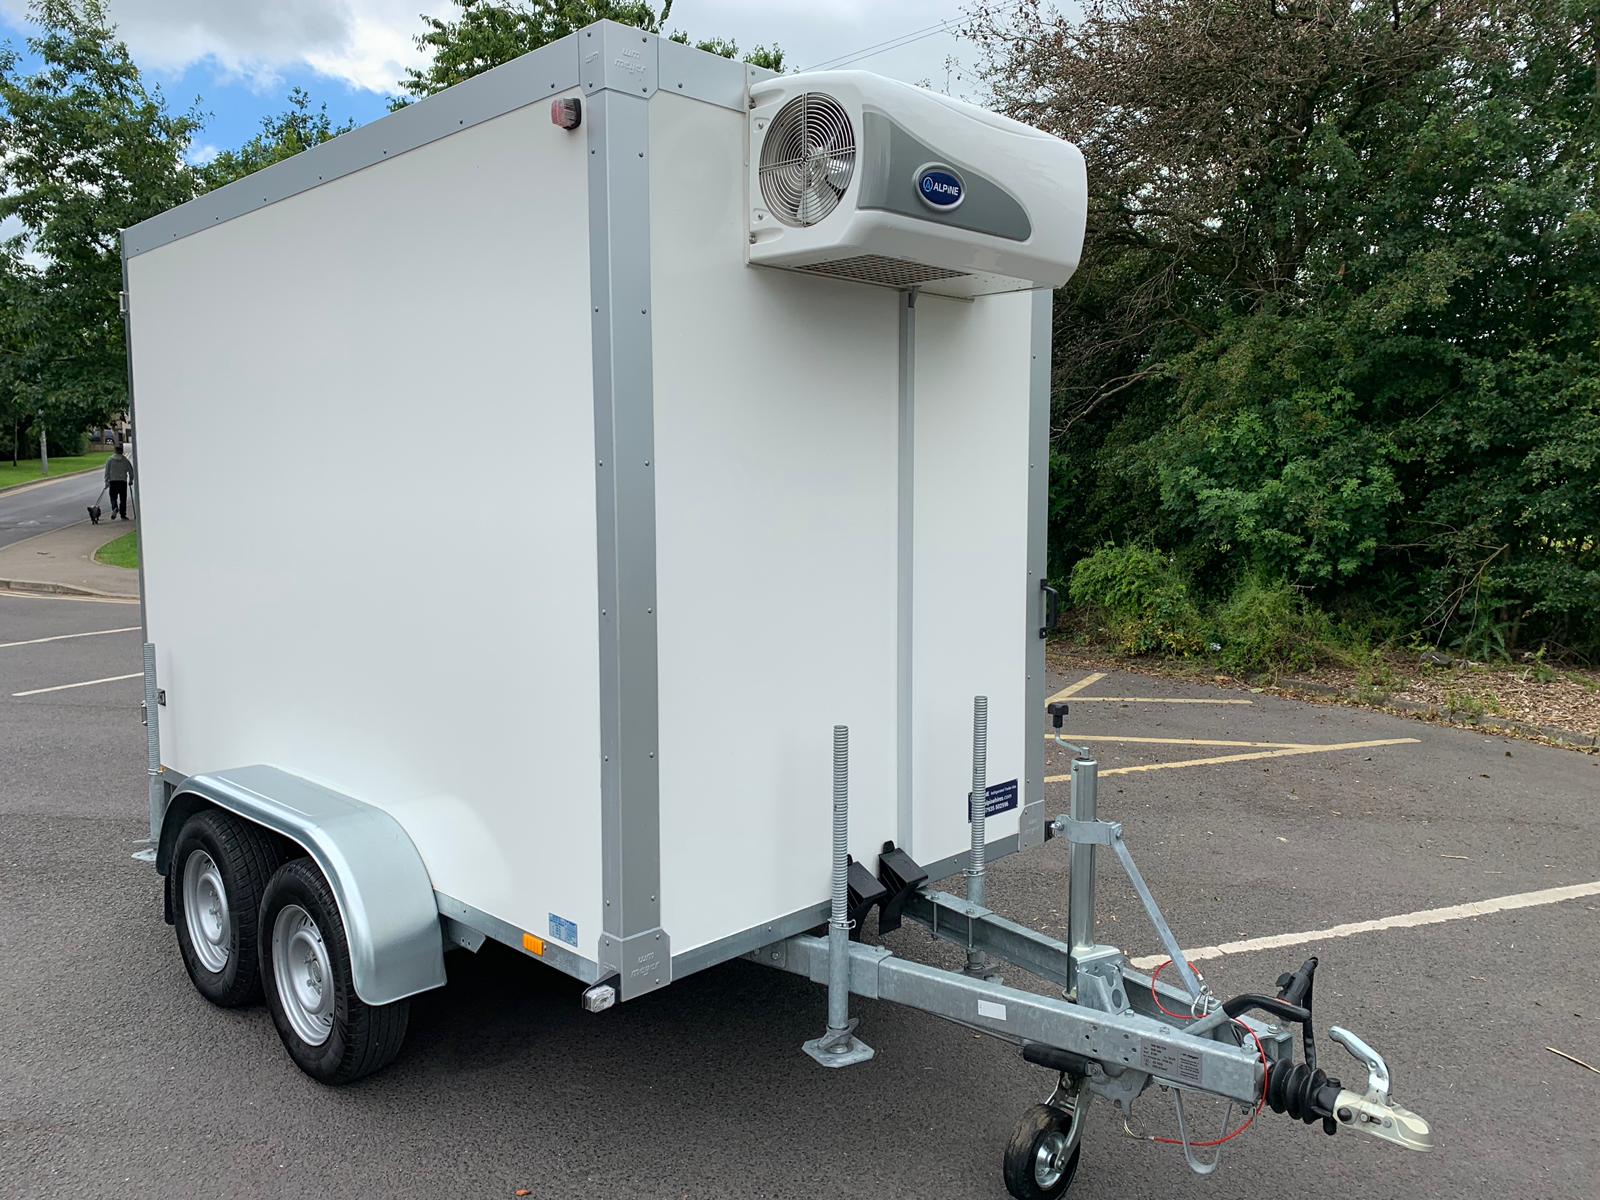 Do You Require Event Trailer Hire in Sheffield This Summer